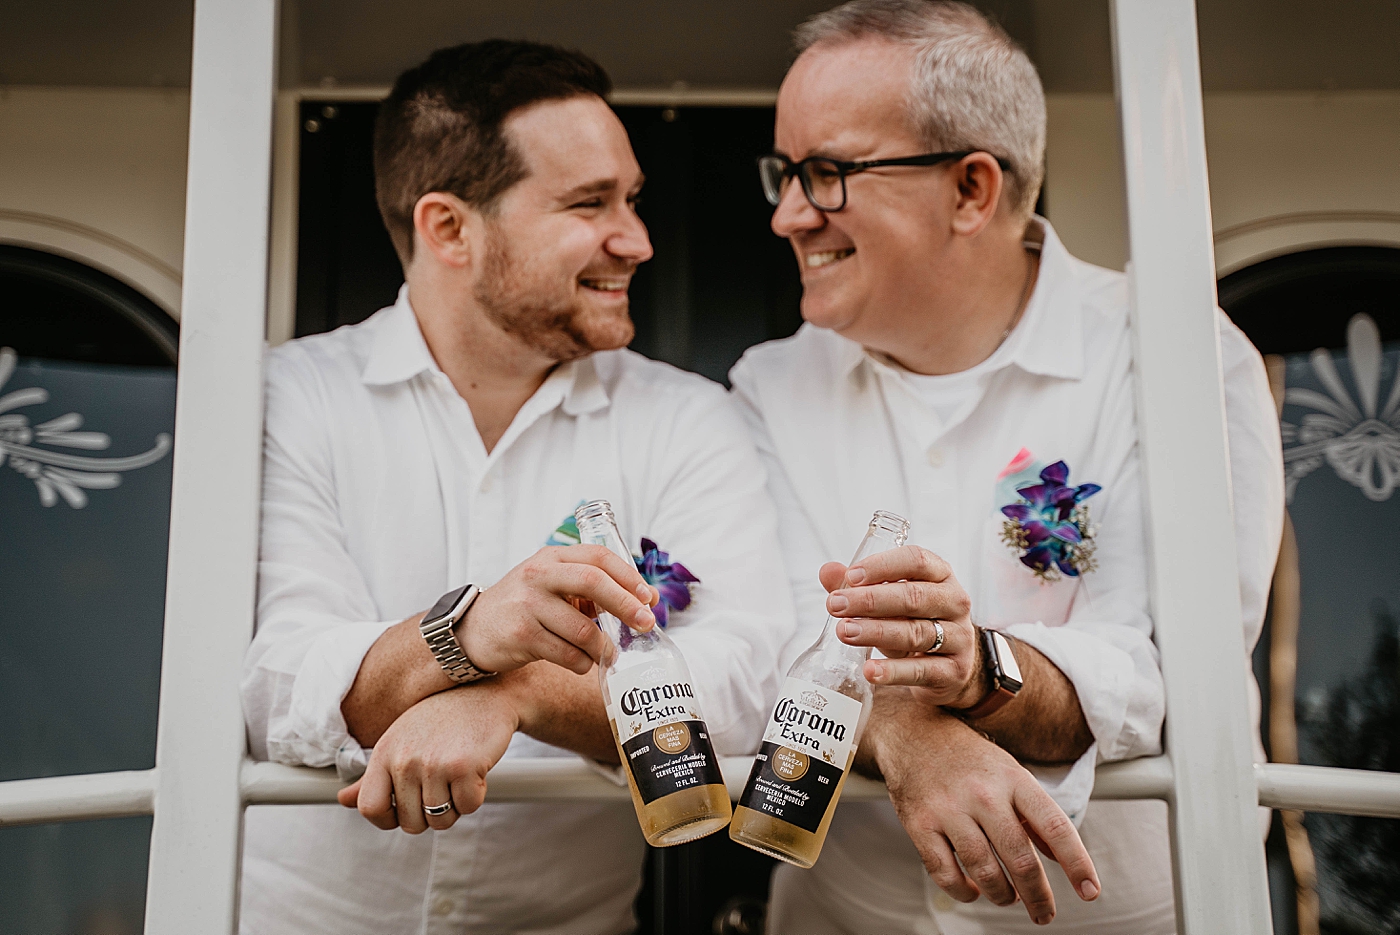 Grooms cheering Coronas on trolley Palm Beach Elopement Photography captured by South Florida Photographer Krystal Capone Photography 